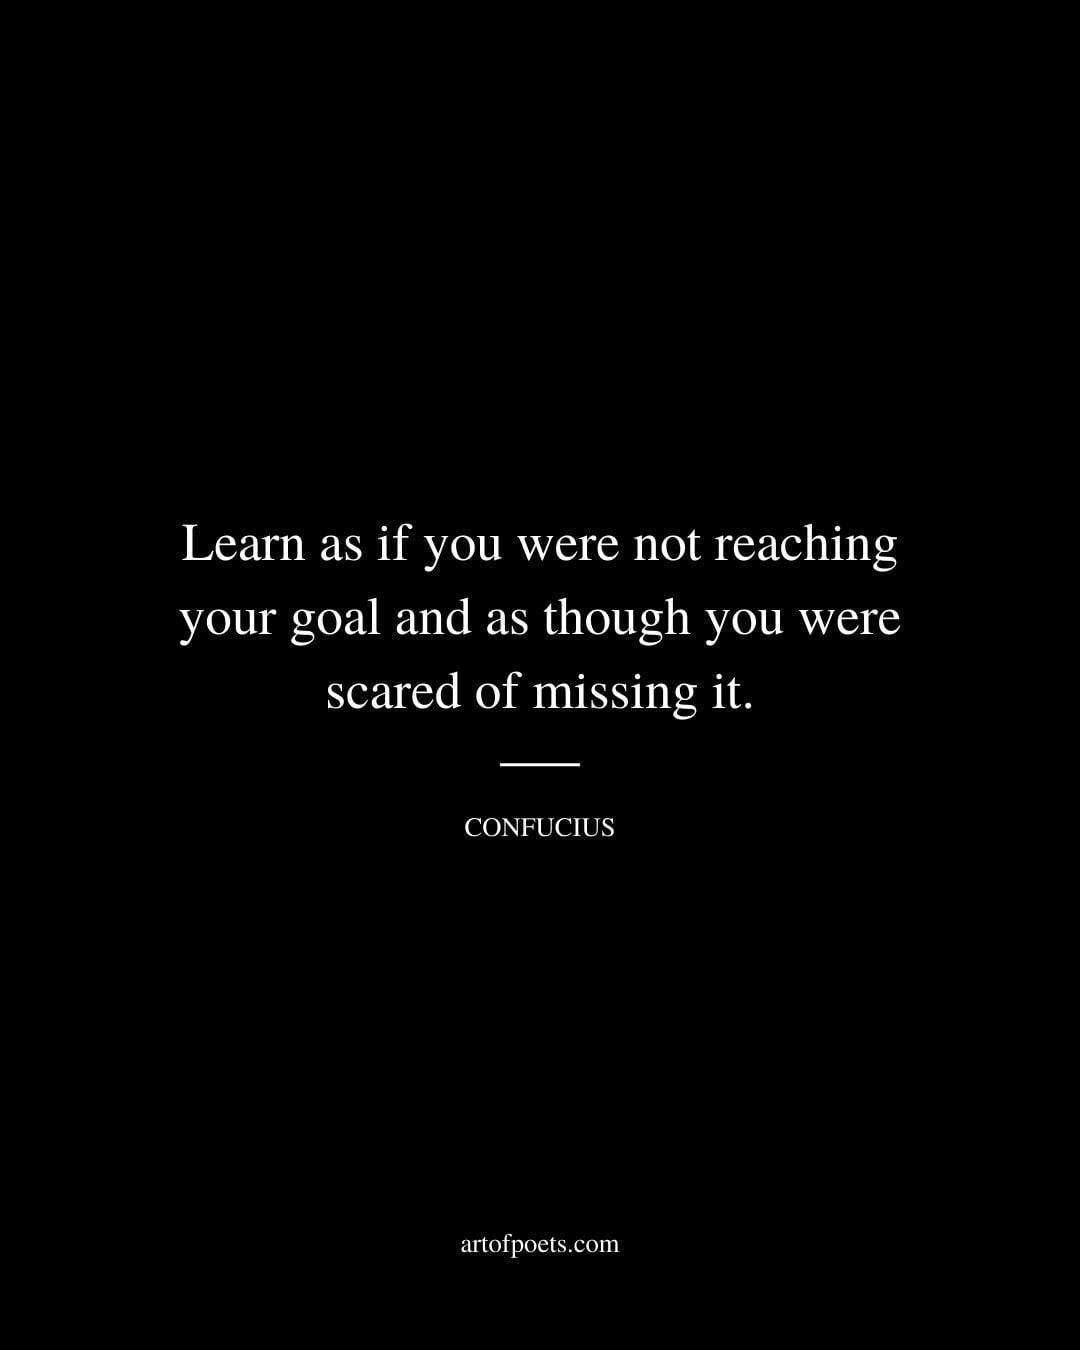 Learn as if you were not reaching your goal and as though you were scared of missing it